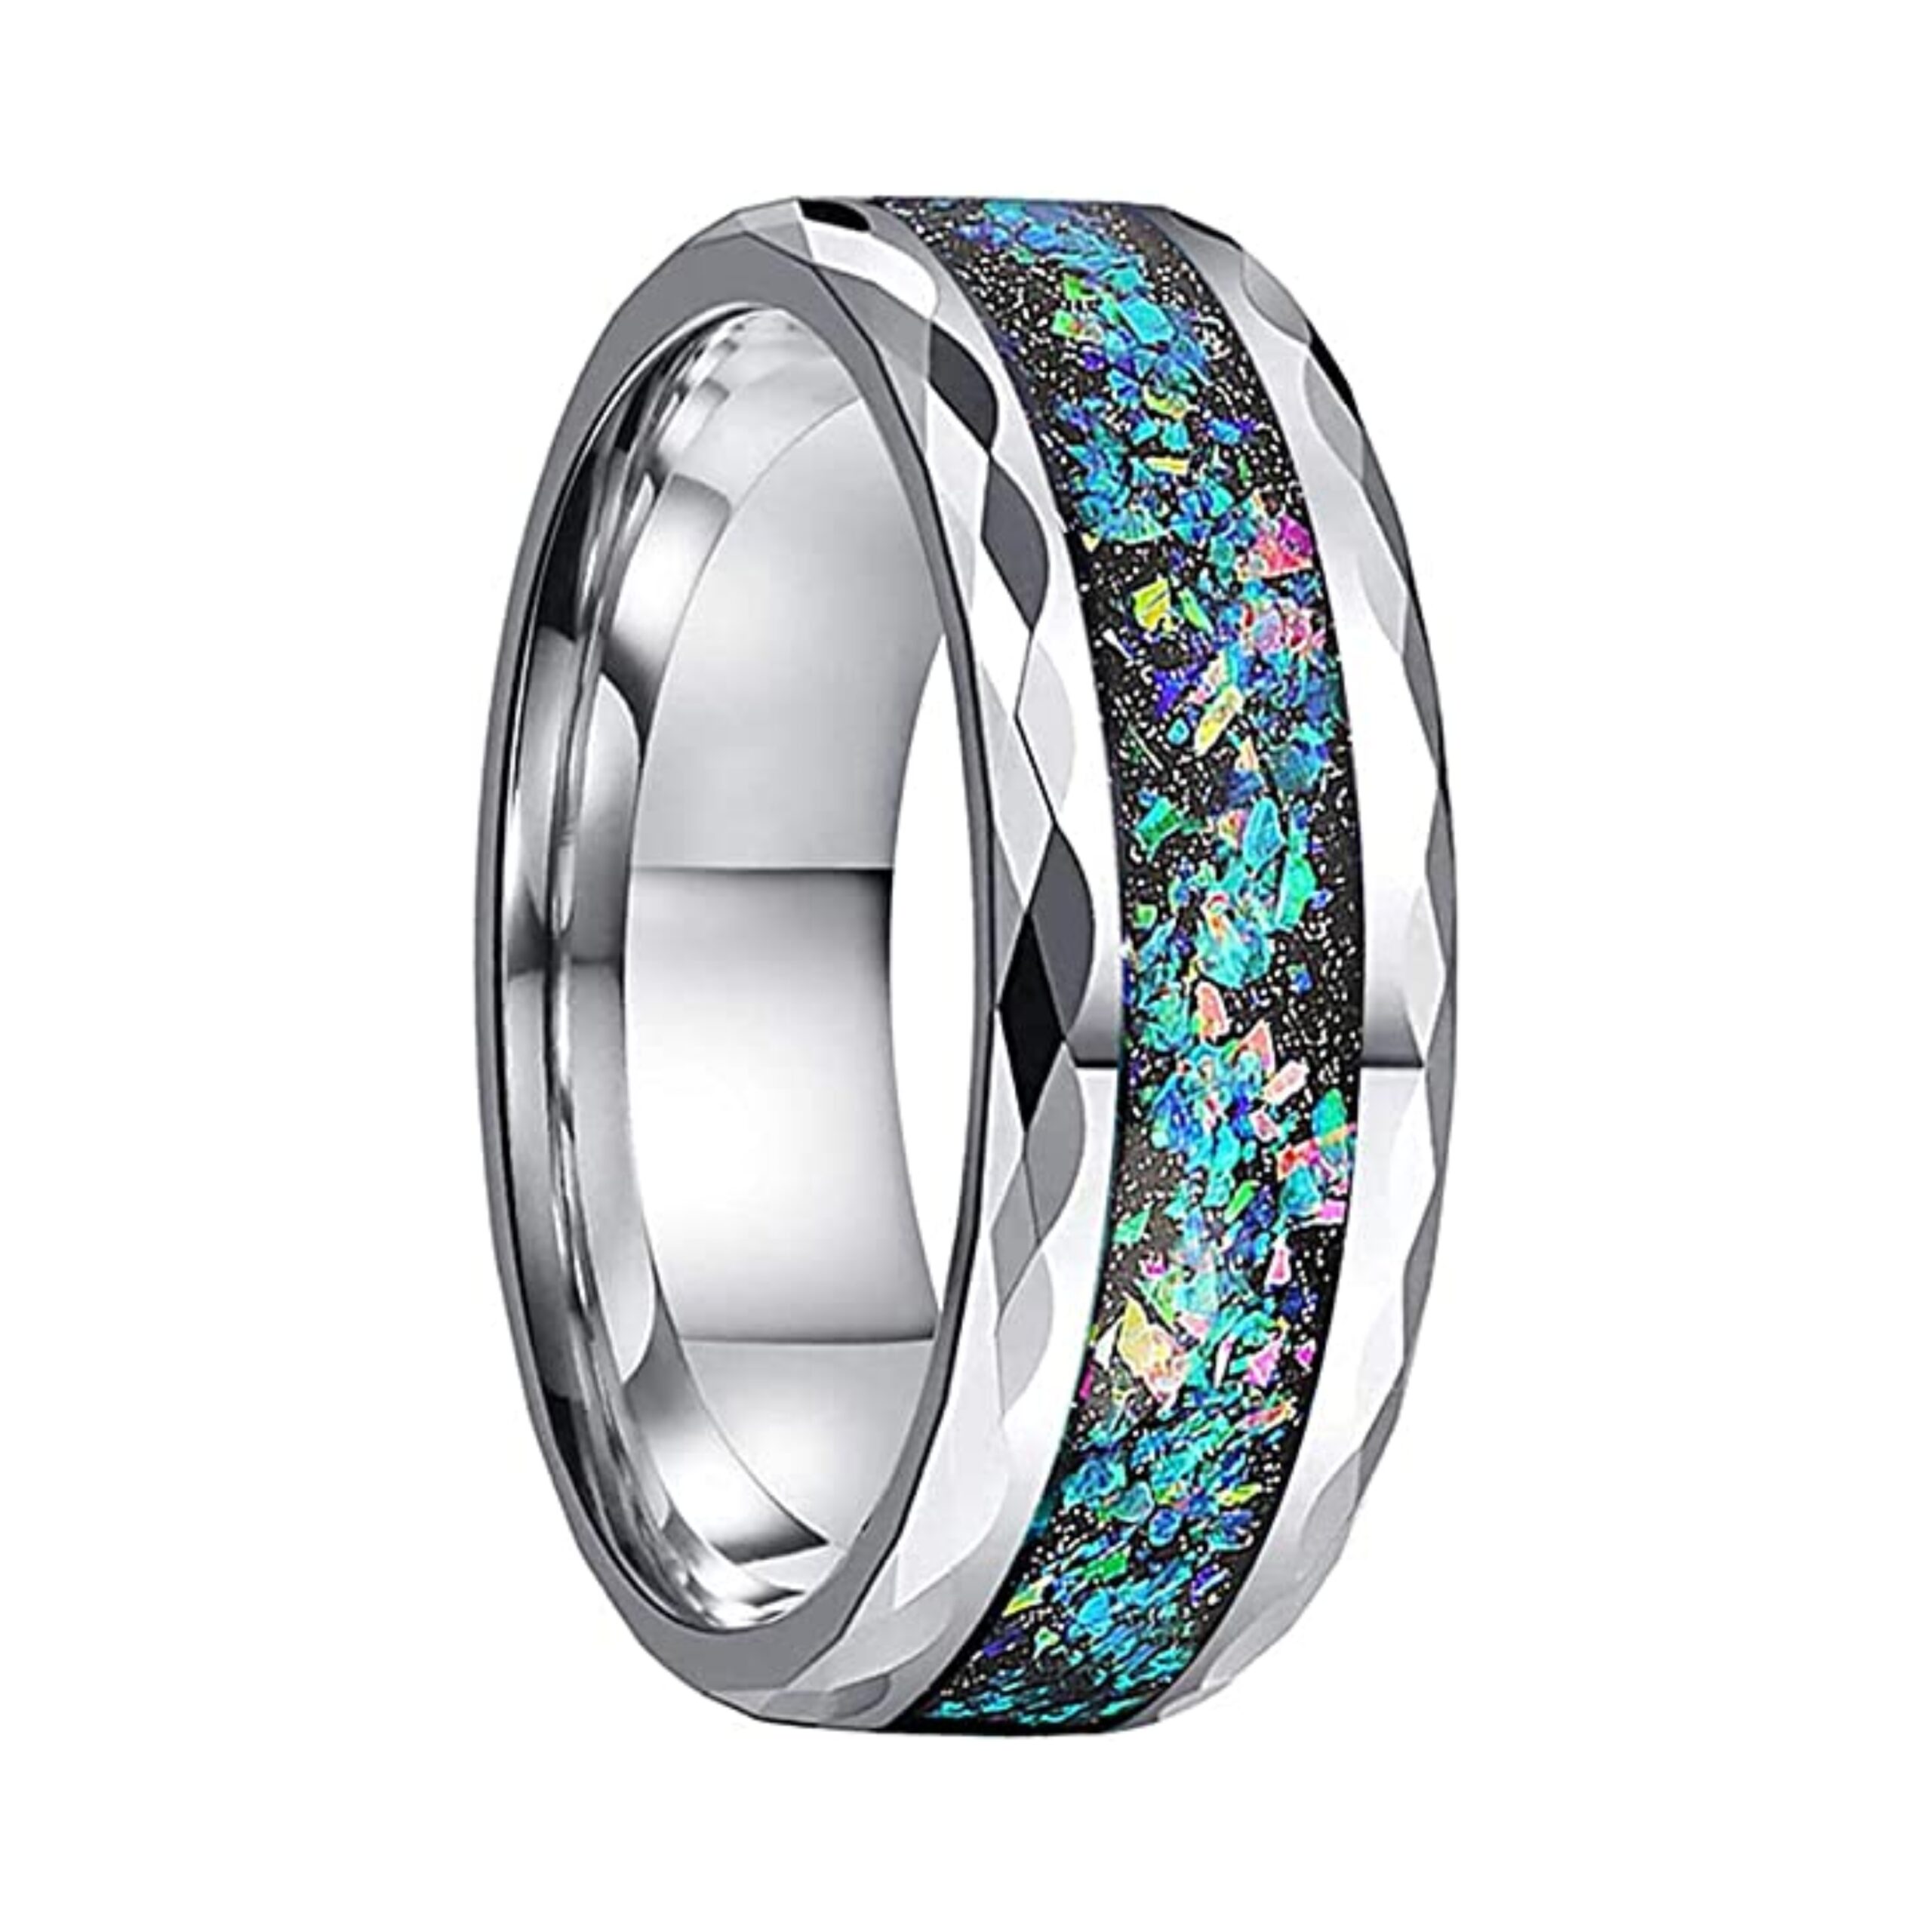 Wedding Ring with Opal Stones